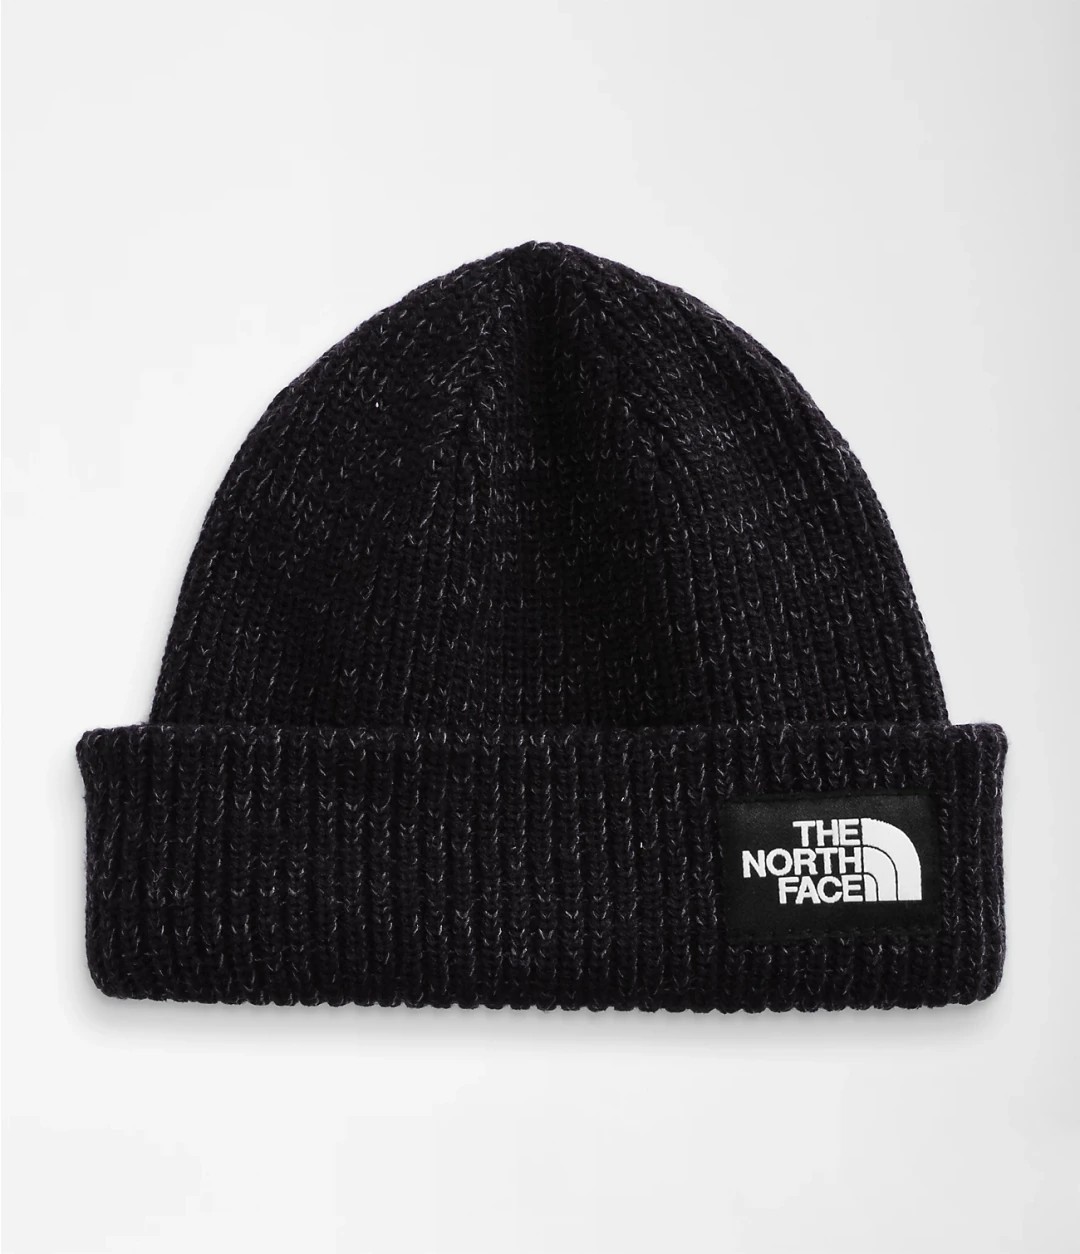 The North Face Salty Lined Beanie - Siyah